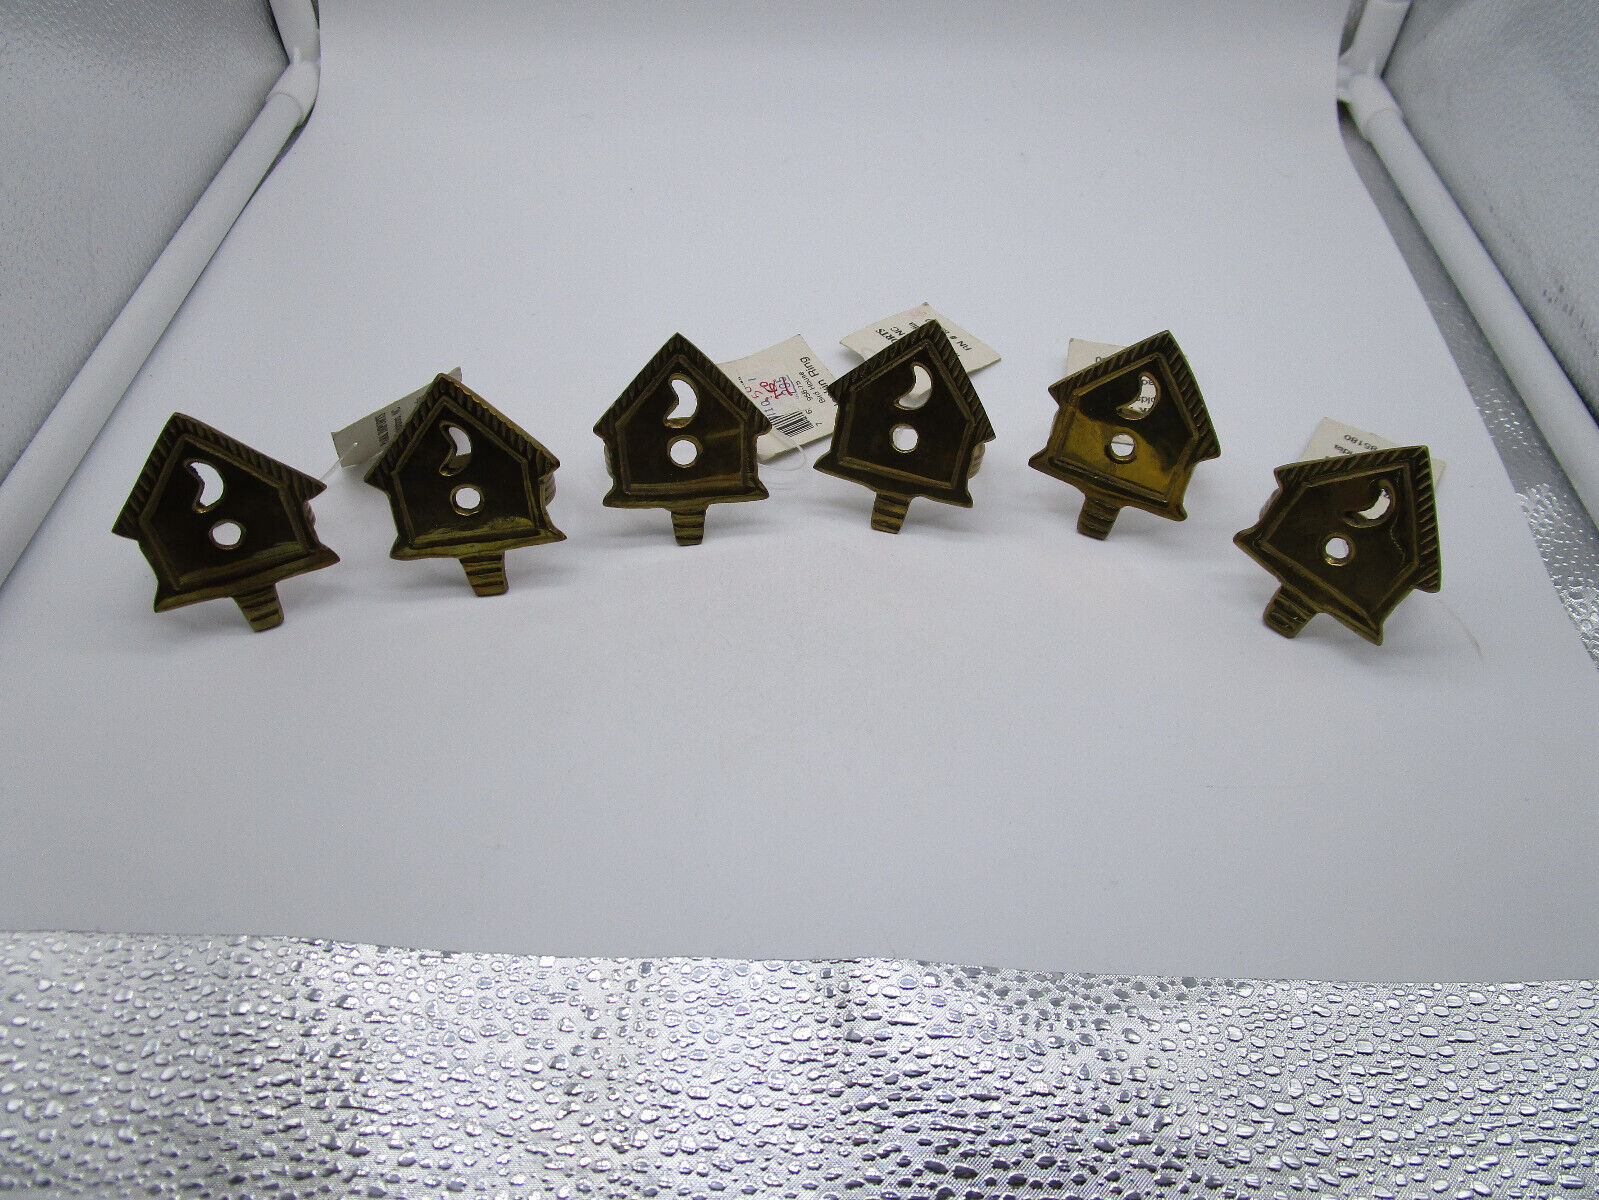 6  BIRD HOUSE NAPKIN RINGS   SOLID BRASS    VINTAGE   UNIQUE